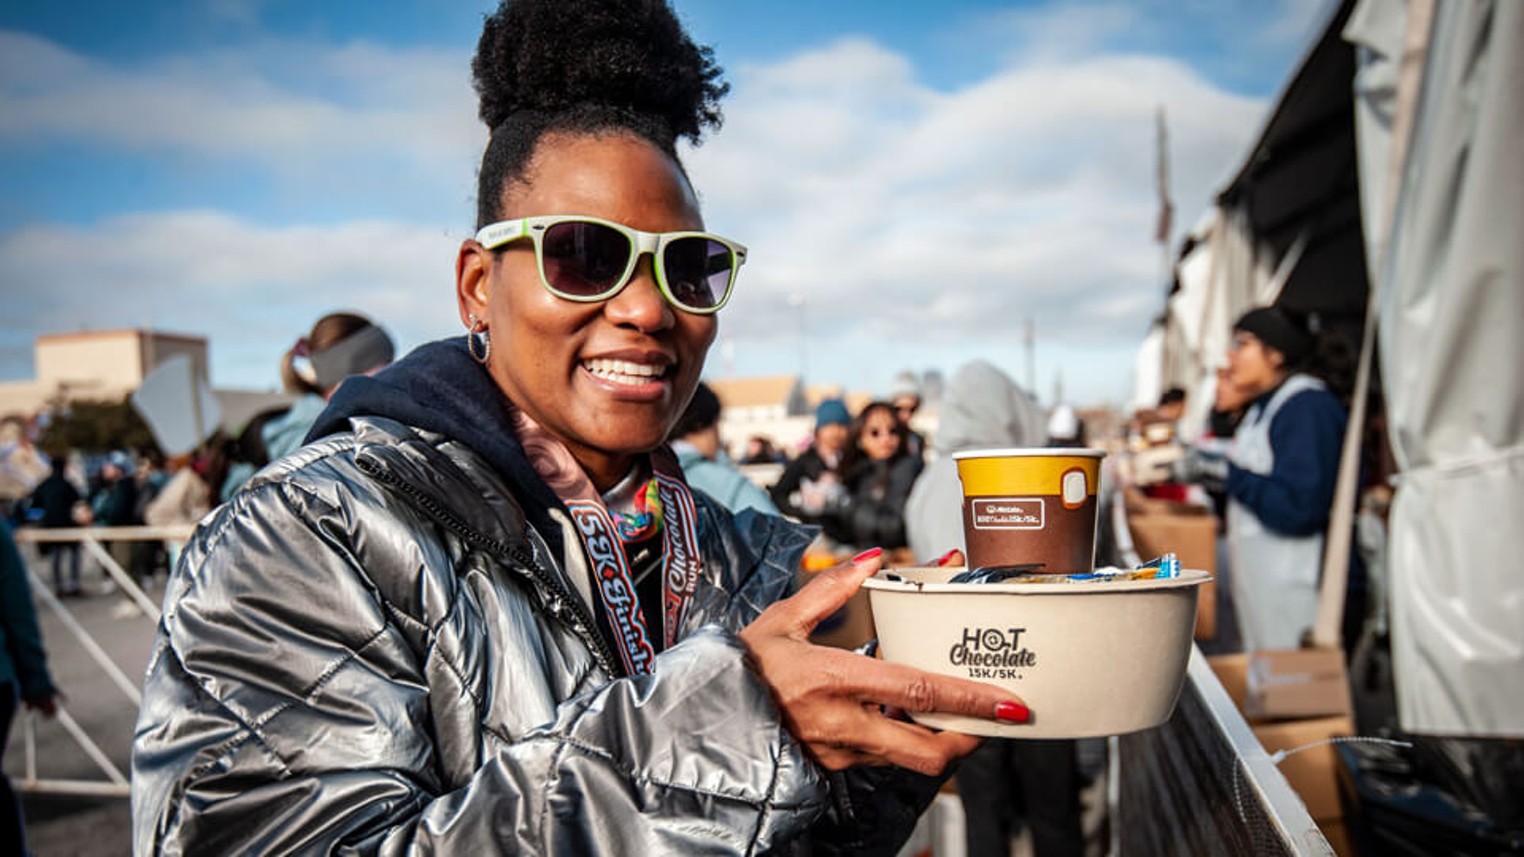 This weekend's Hot Chocolate Run in downtown Phoenix is a sweet treat